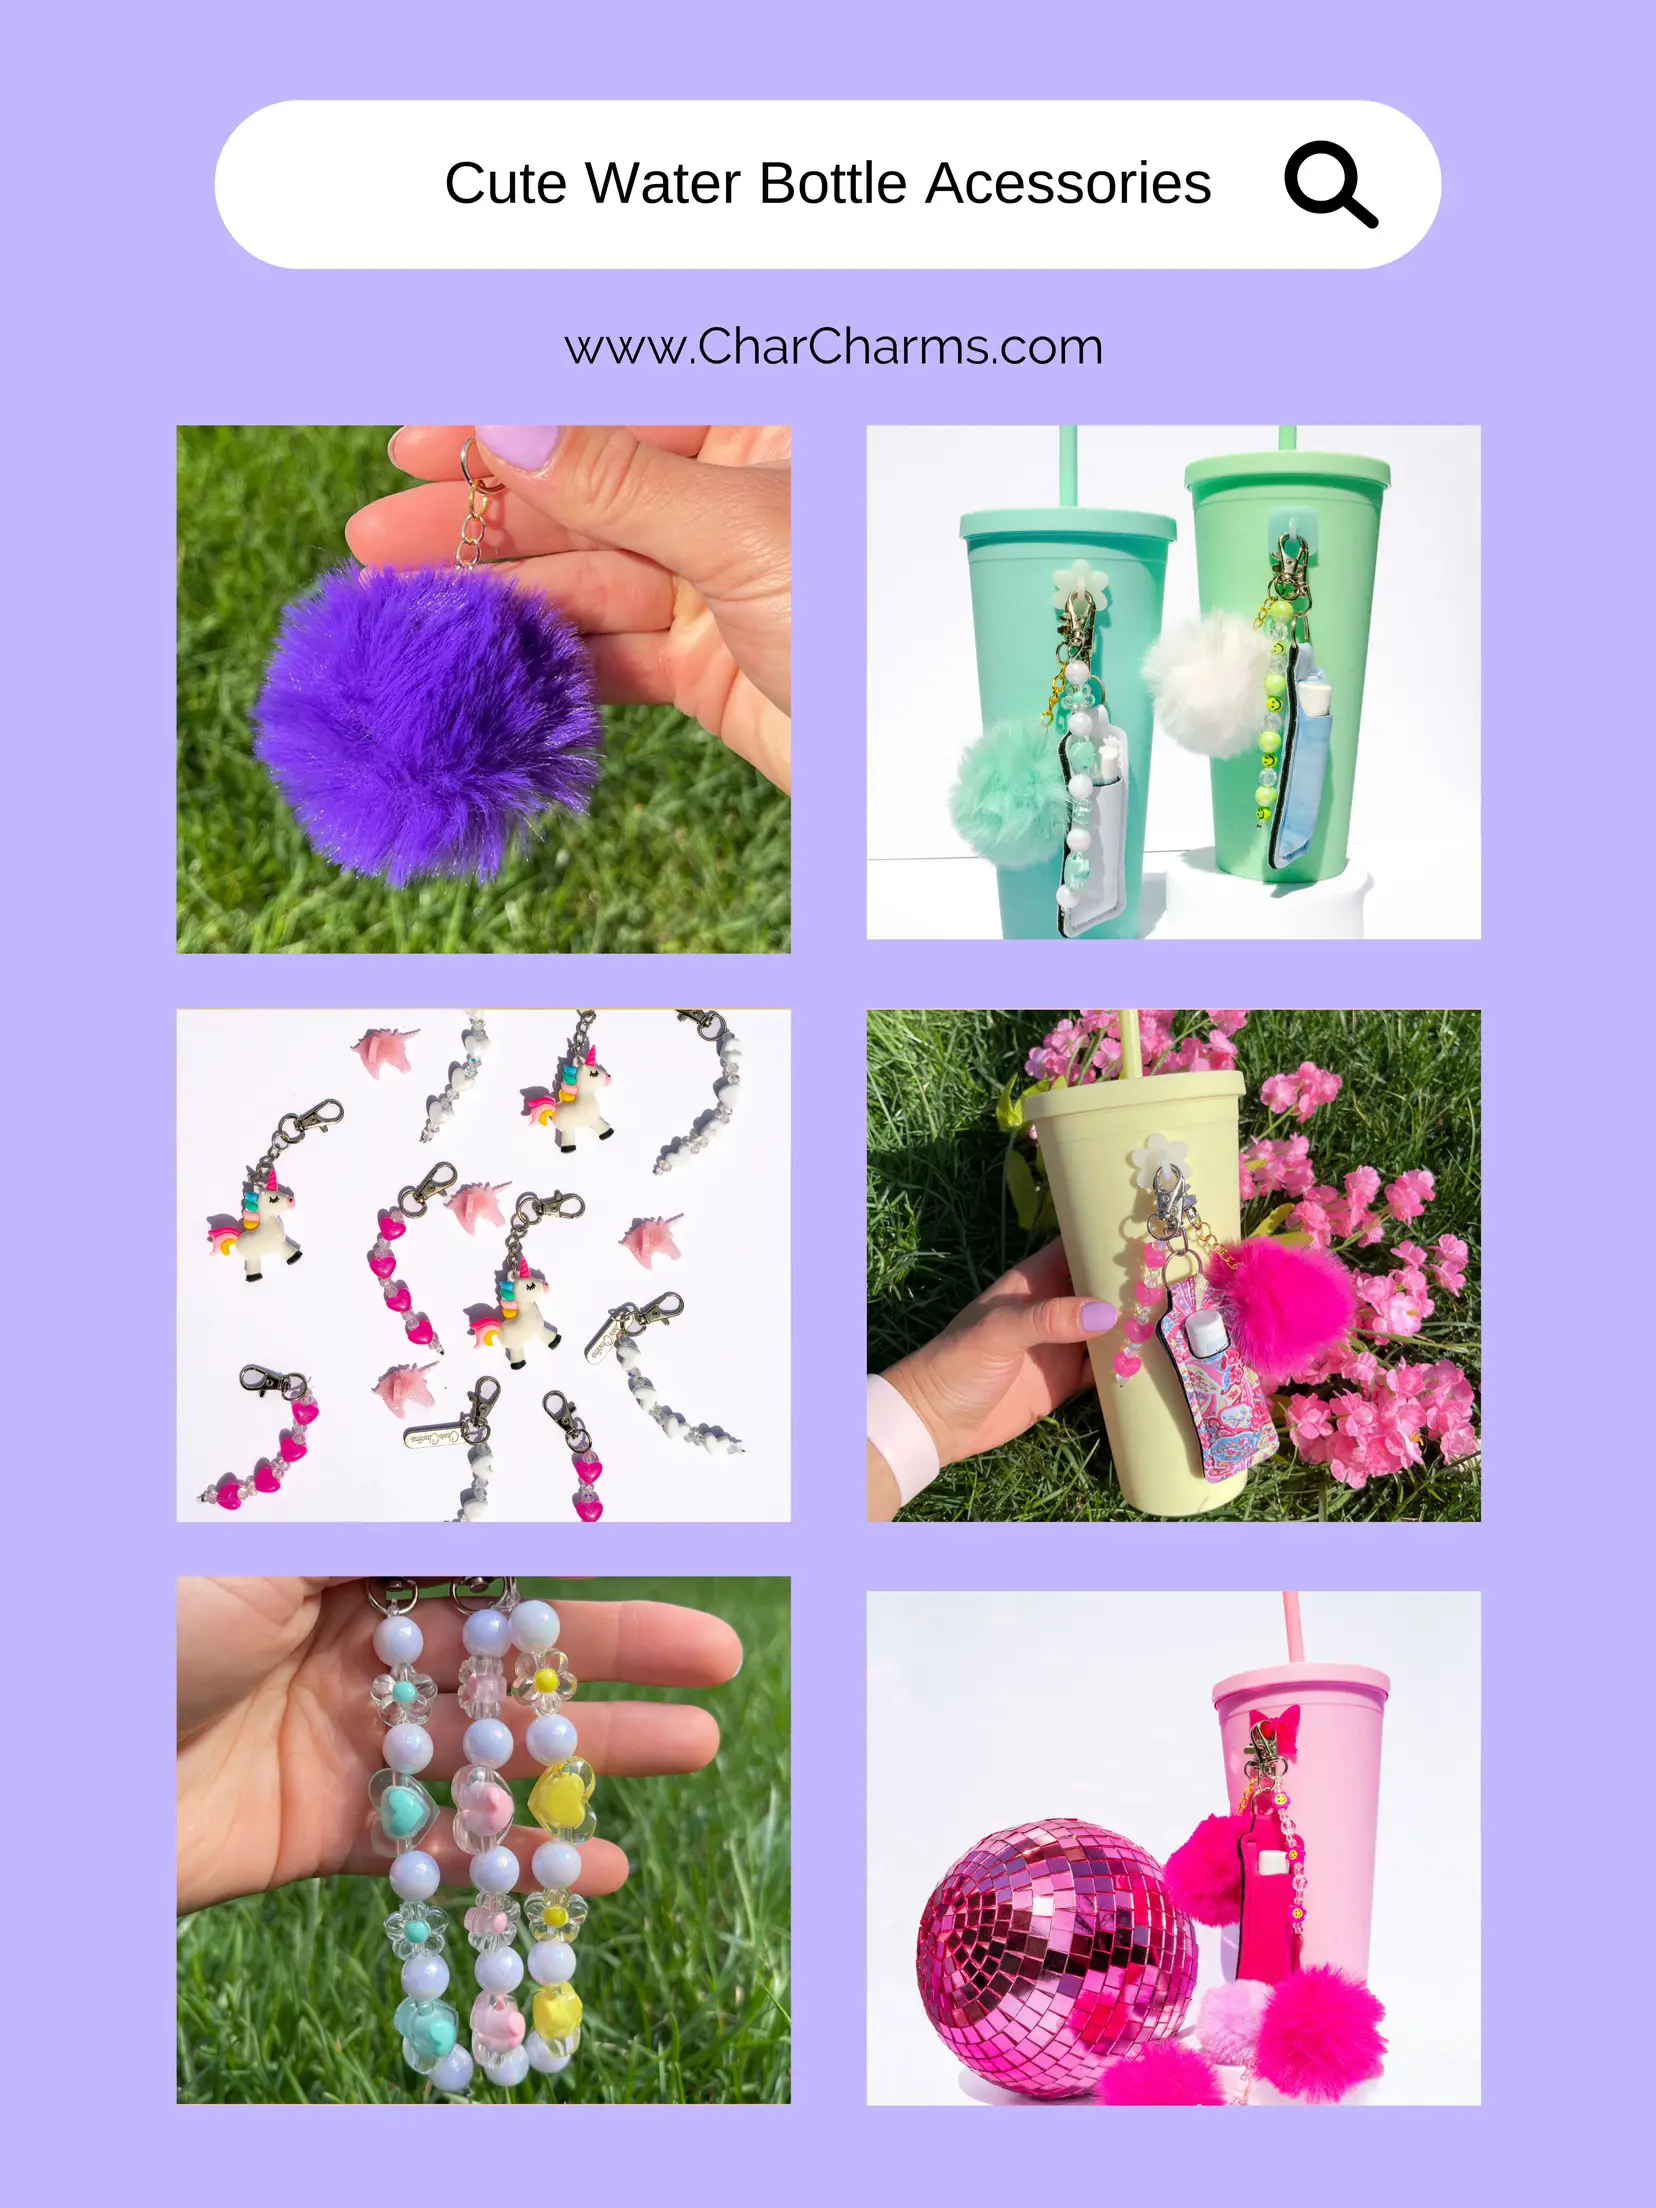 Searching for Cute Water Bottle Accessories ✨, Gallery posted by CharCharms